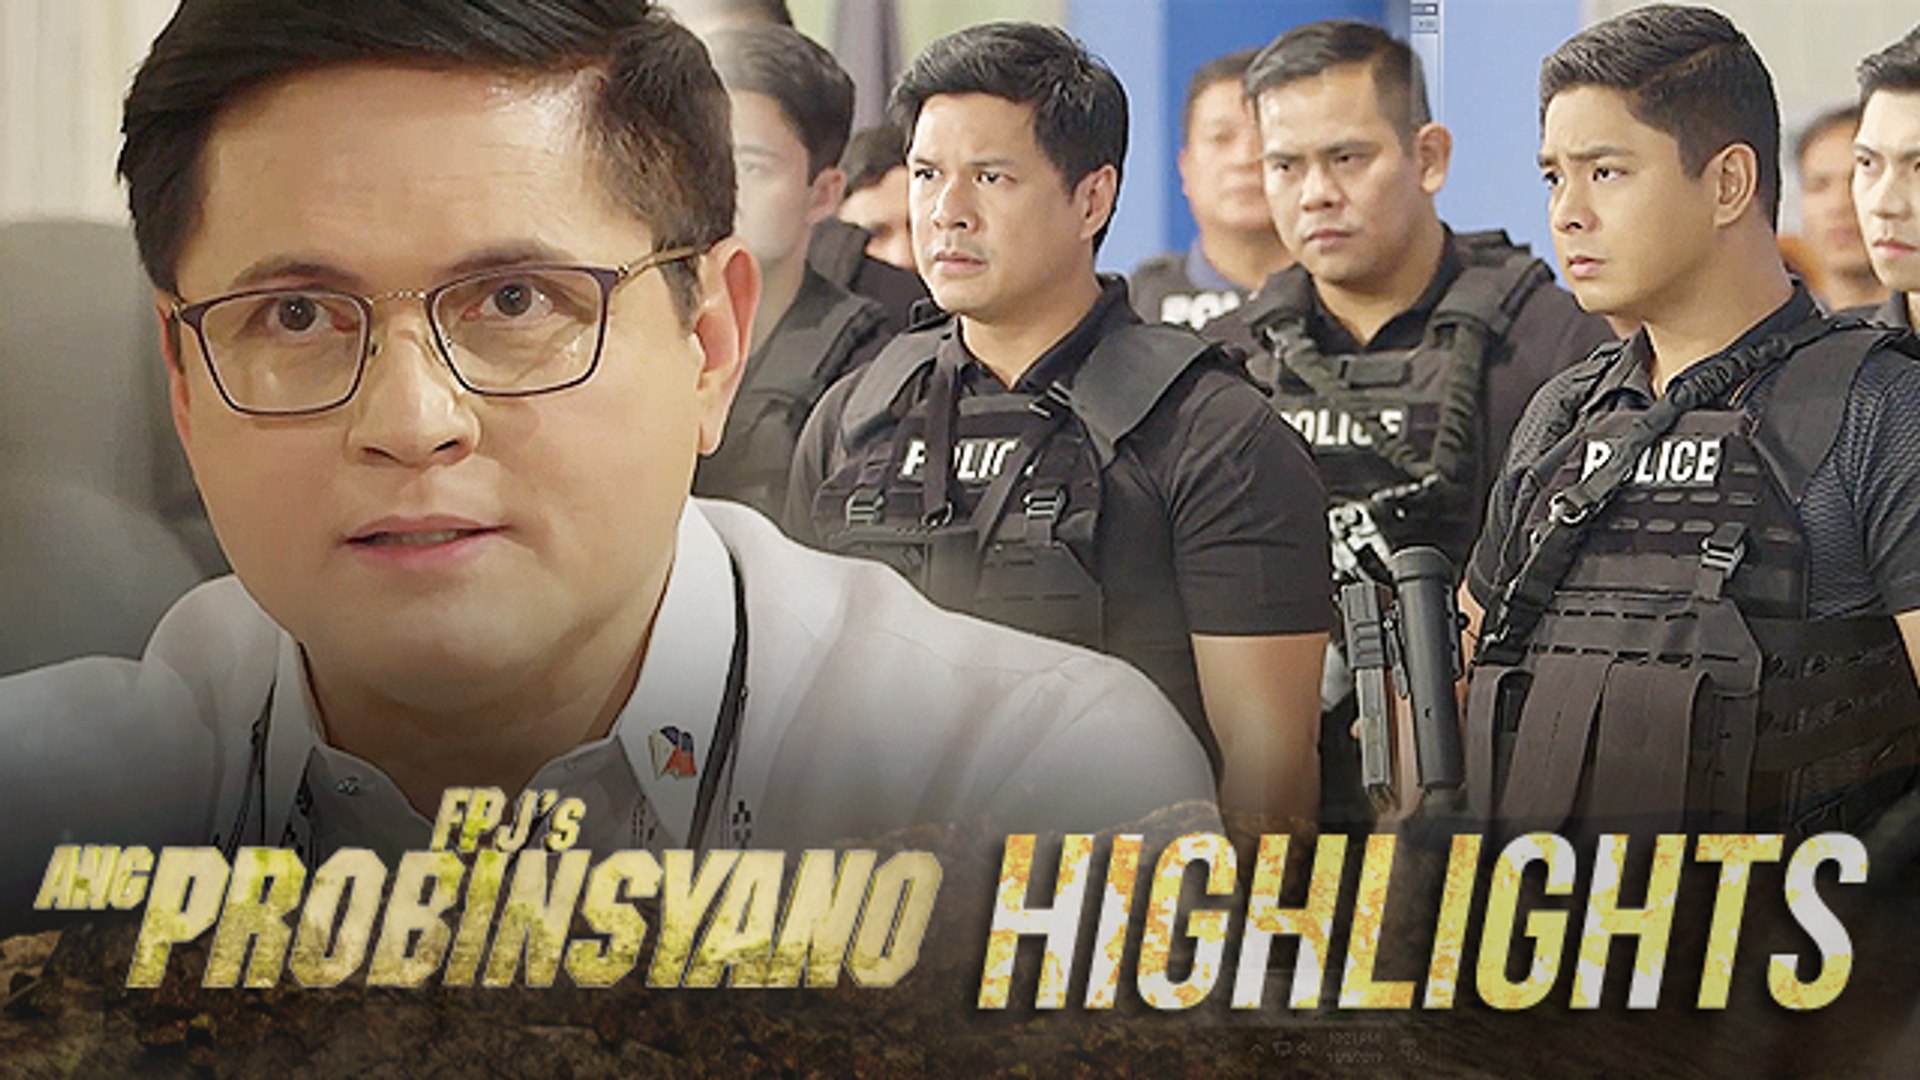 Oscar is confident with Task Force Agila's mission | FPJ's Ang Probinsyano